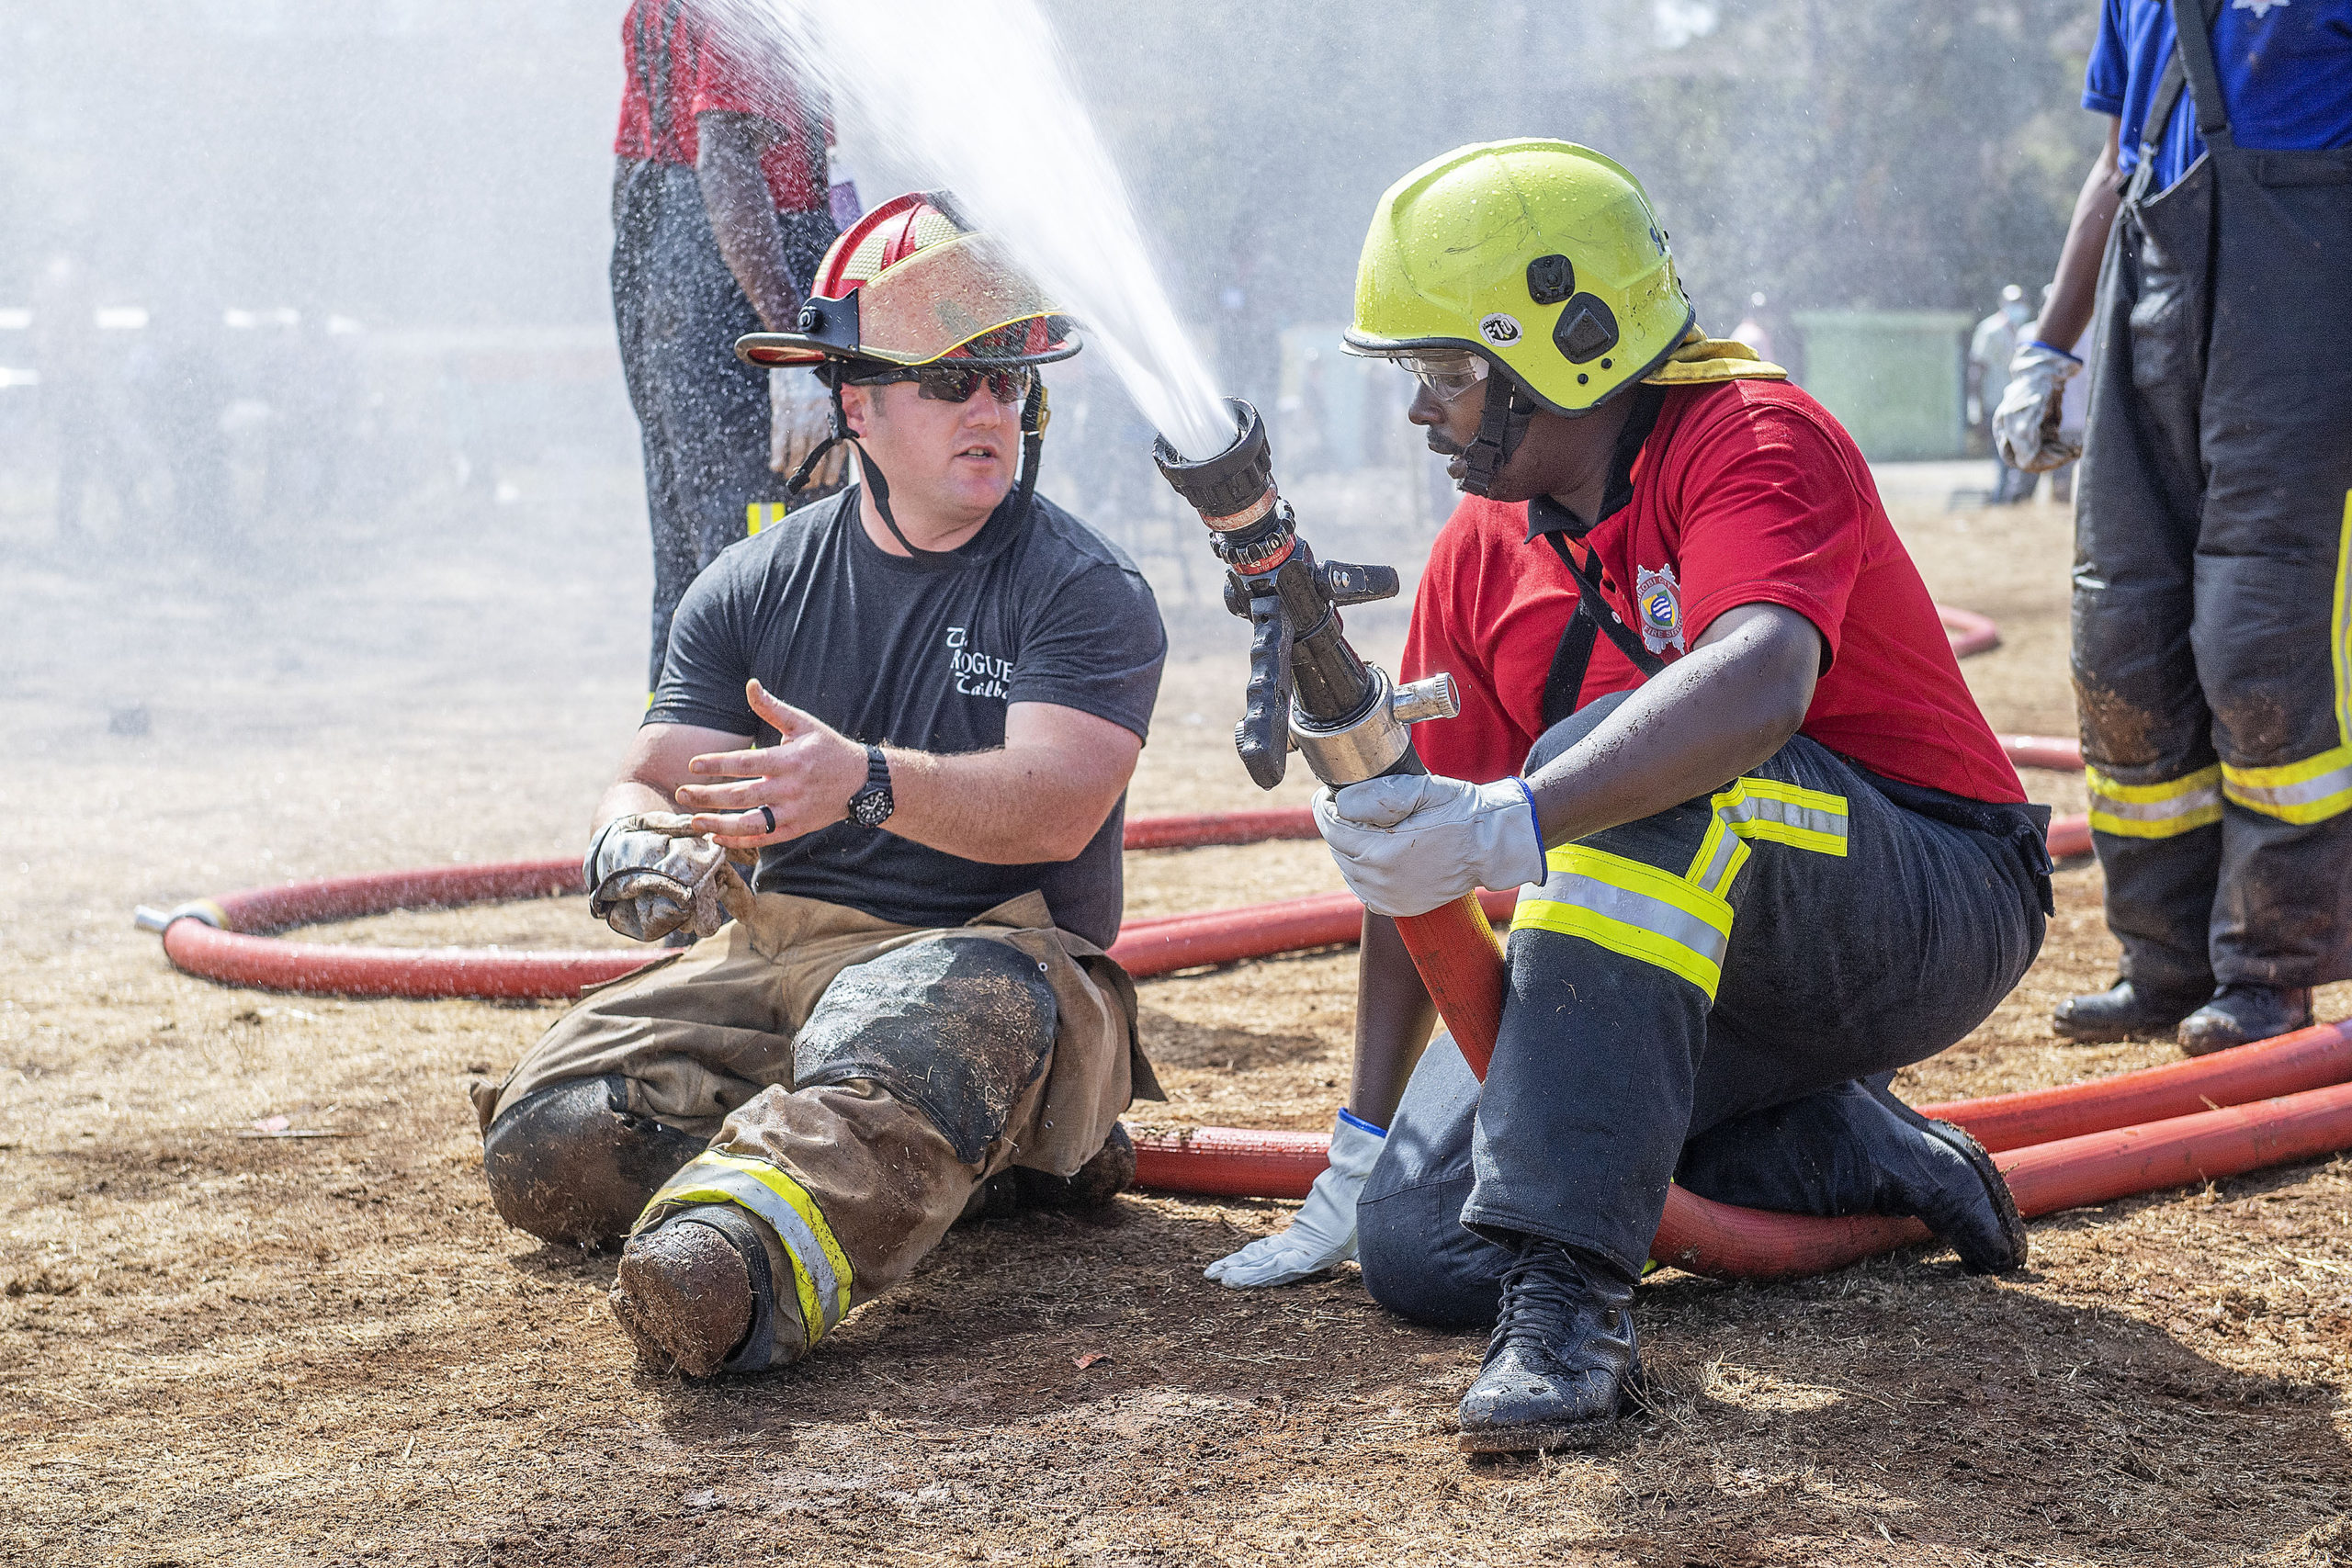 Texas firefighter John Moore gives advice on hose-handling techniques to a Kenyan firefighter during the Africa Fire Mission November trip to Nairobi, Kenya.